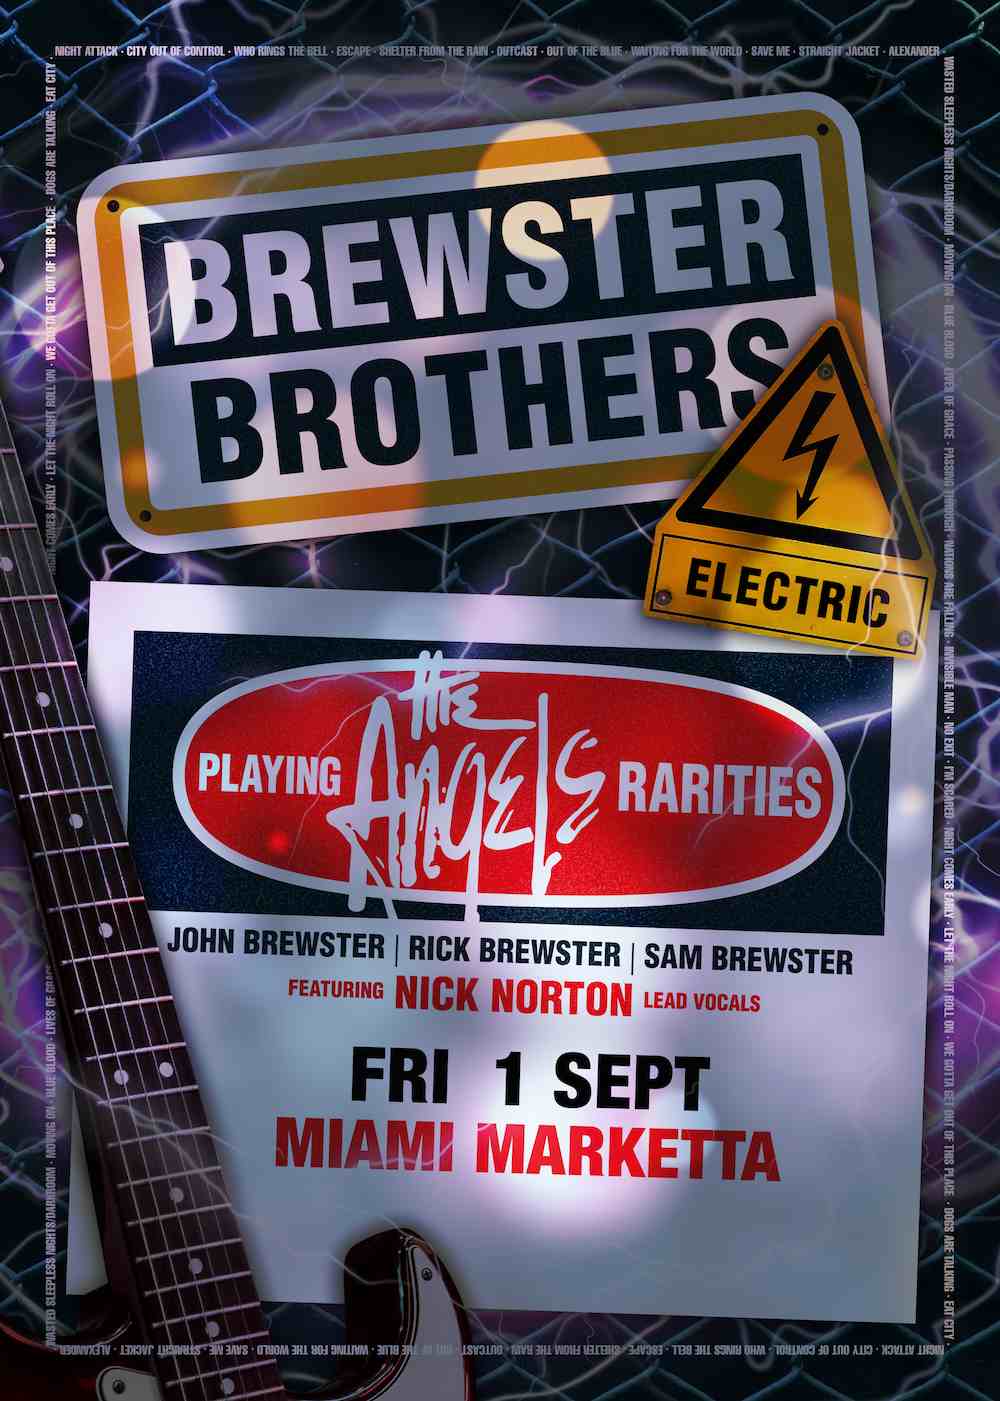 Brewster Brothers Electric Play Angels Rarities - Fri 1st Sep - 2023 - Miami Marketta - Poster